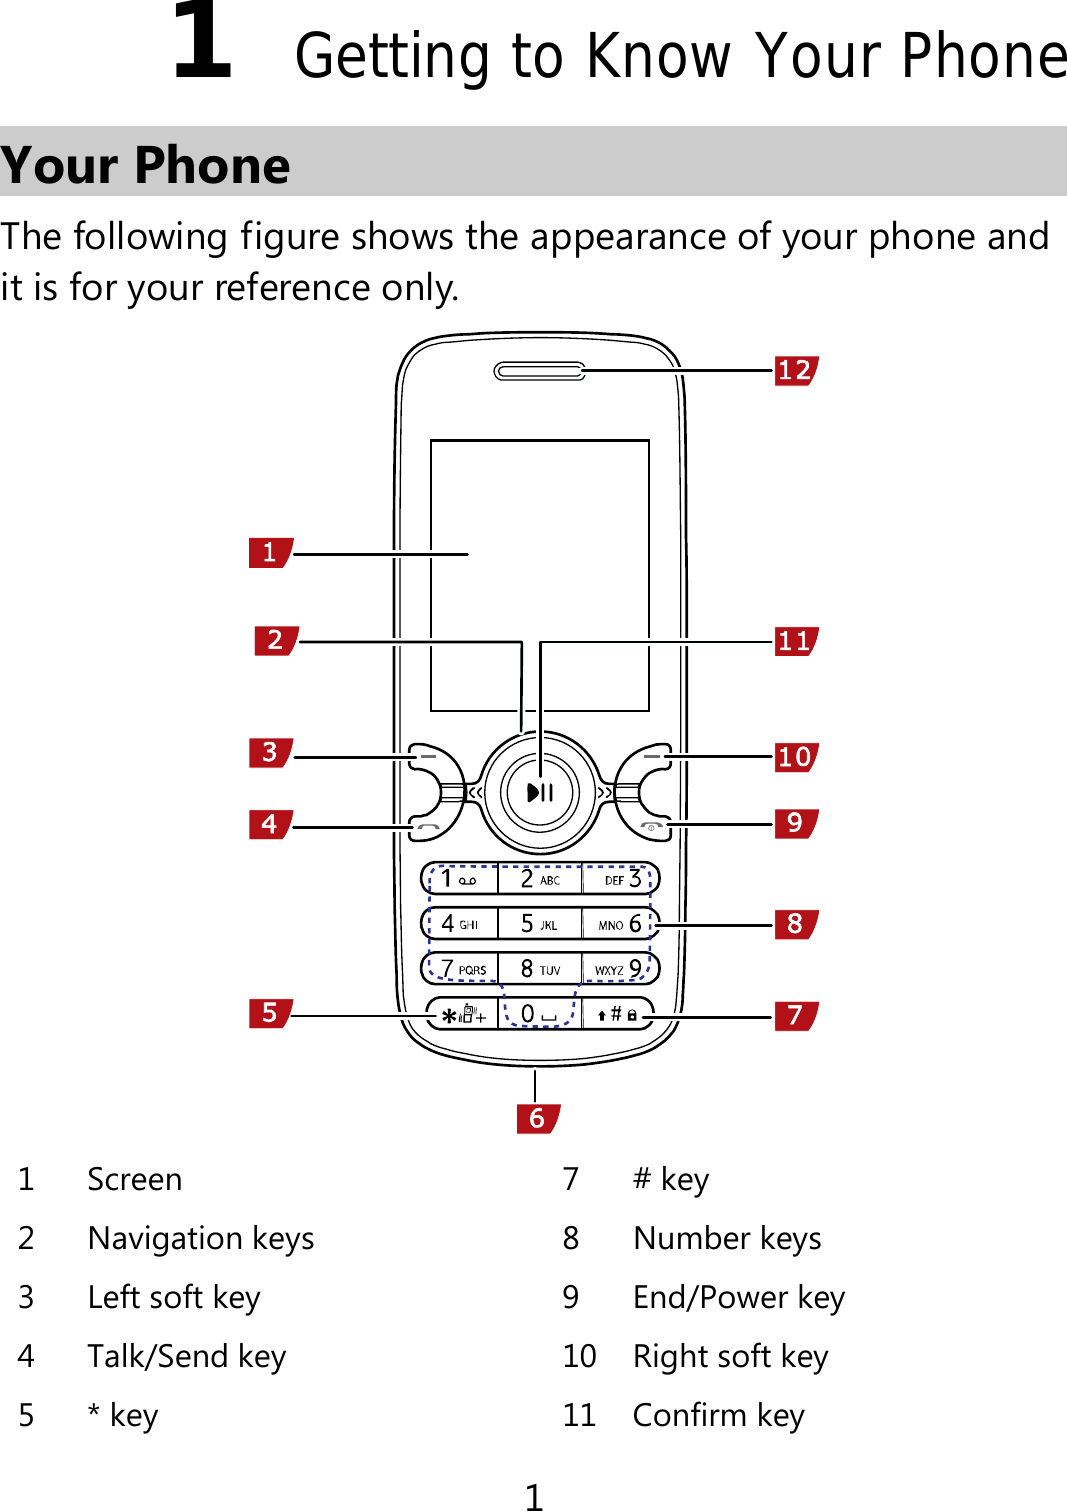 1 1  Getting to Know Your Phone Your Phone The following figure shows the appearance of your phone and it is for your reference only.     1 Screen  7 # key 2 Navigation keys  8 Number keys  3  Left soft key  9  End/Power key   4  Talk/Send key  10 Right soft key   5  * key    11 Confirm key 